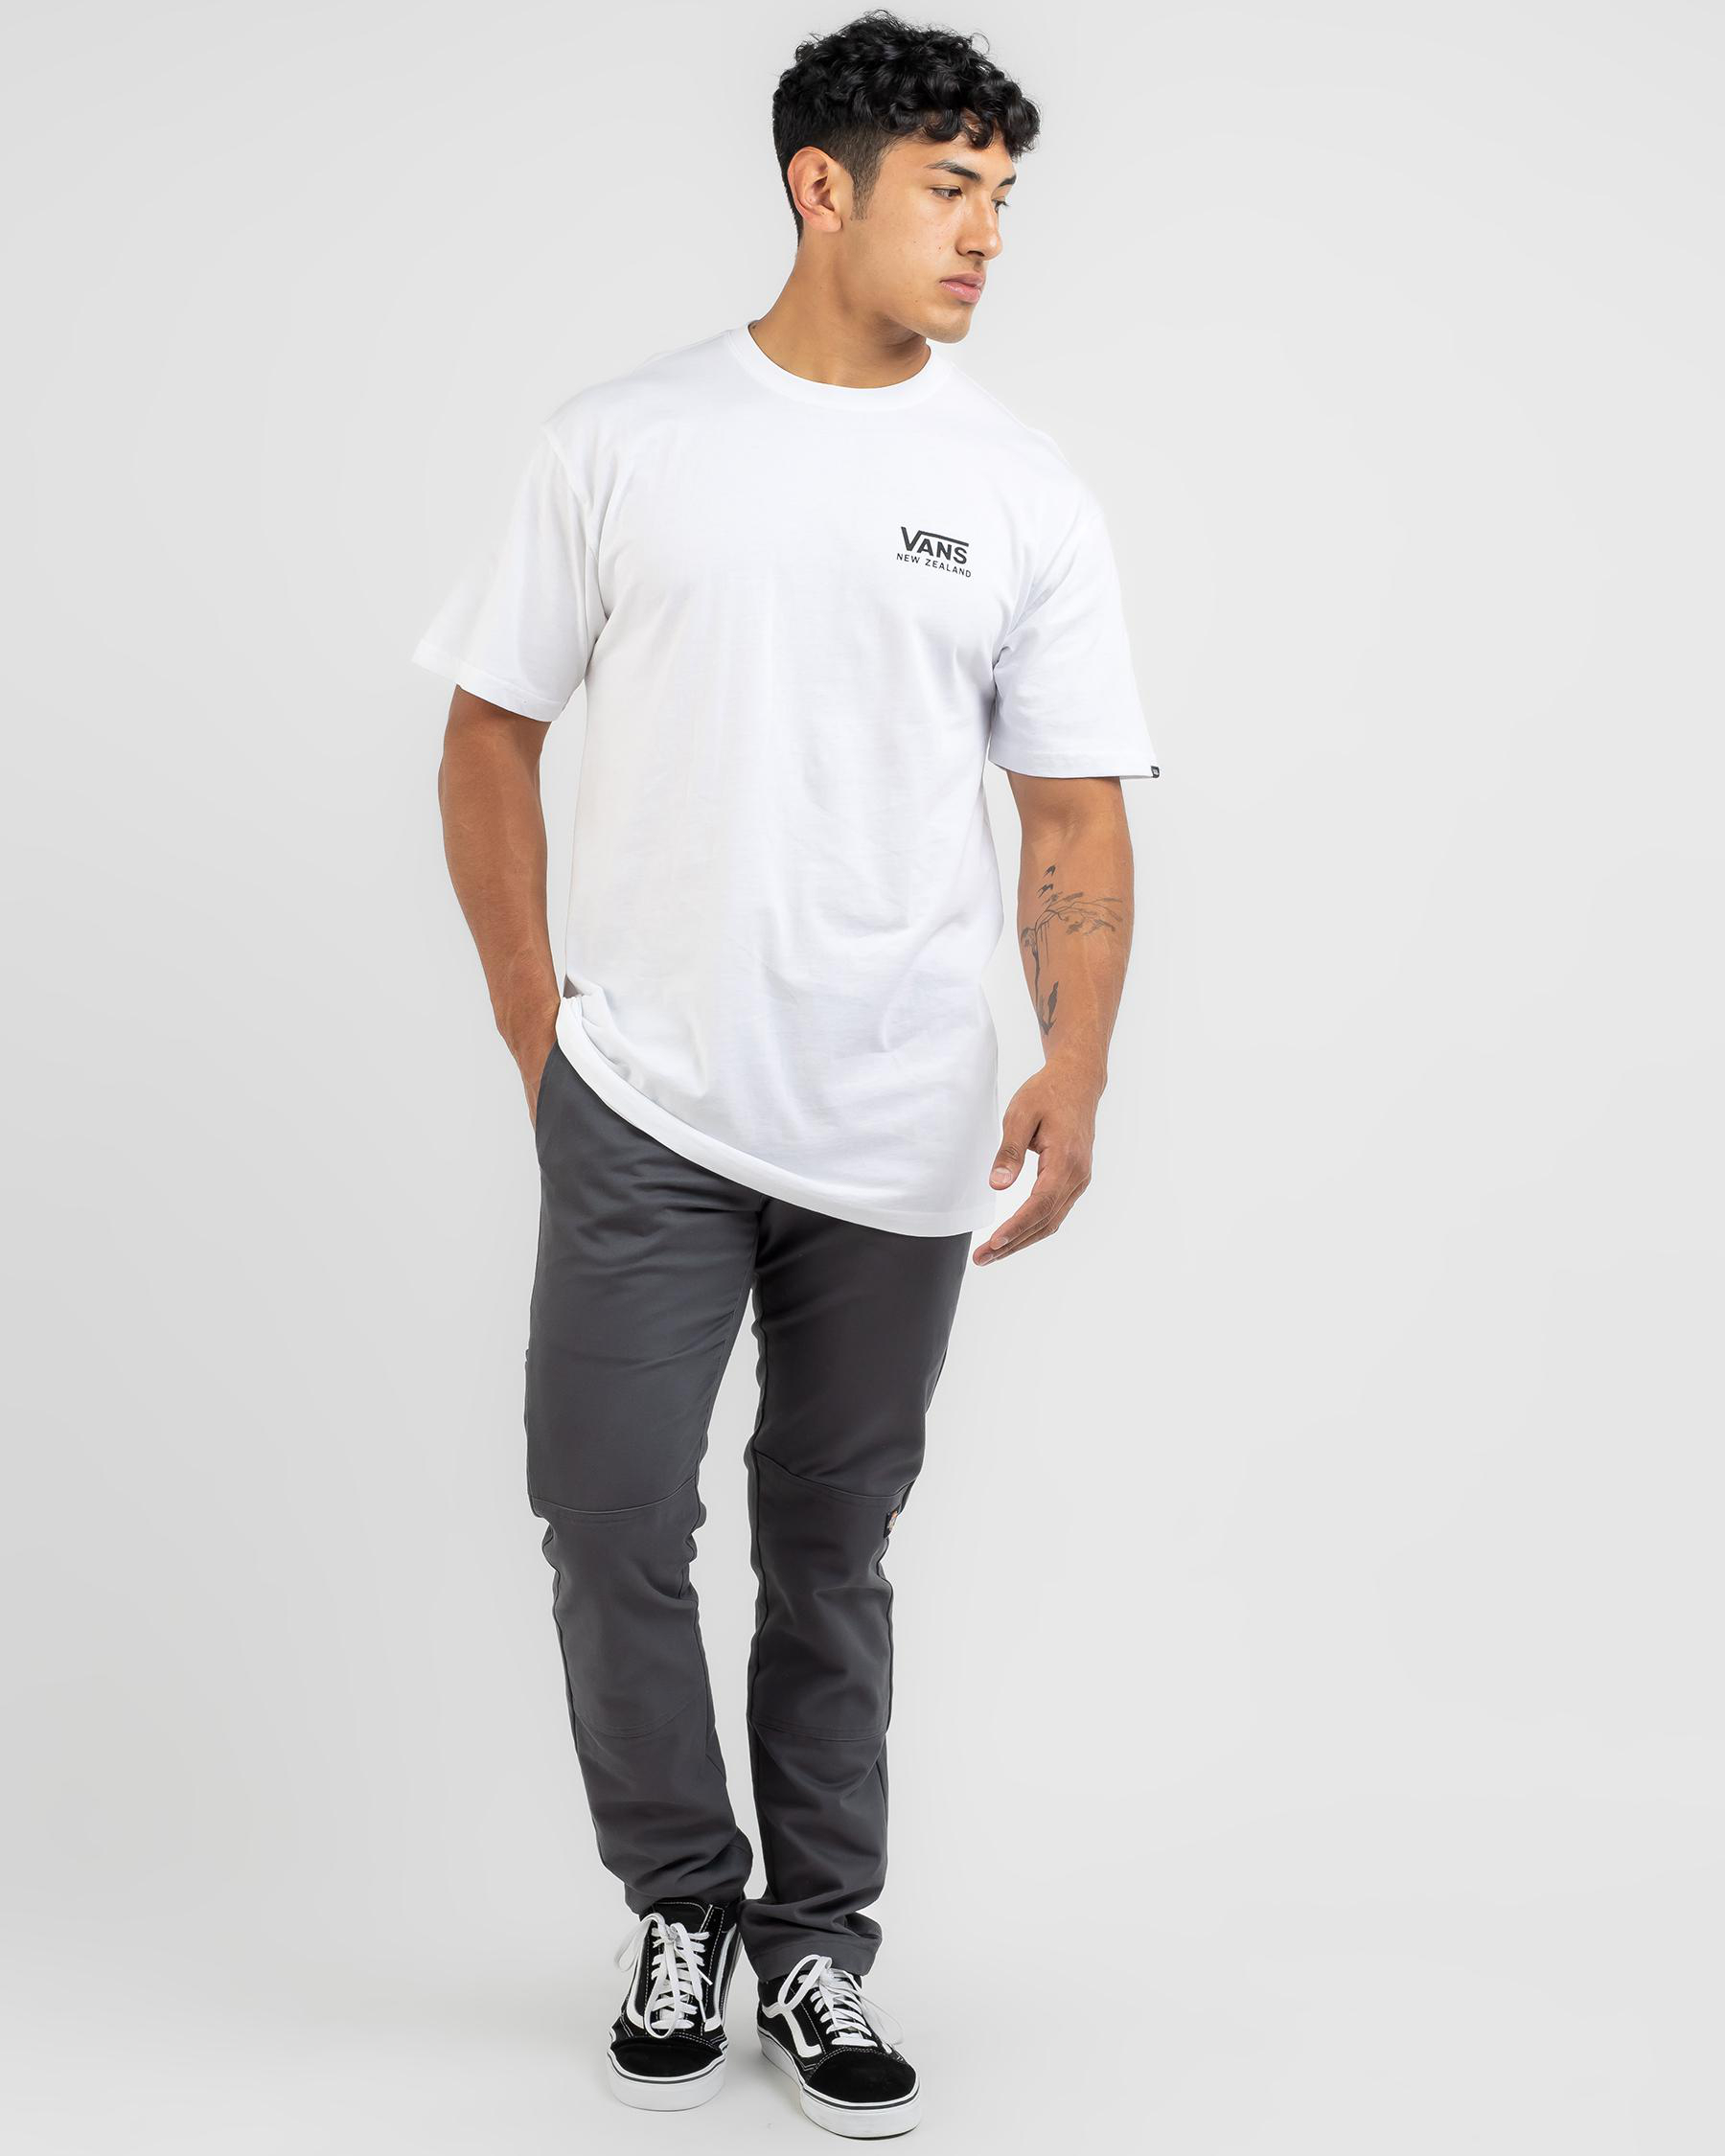 Shop Vans New Zealand T-Shirt In White - Fast Shipping & Easy Returns ...